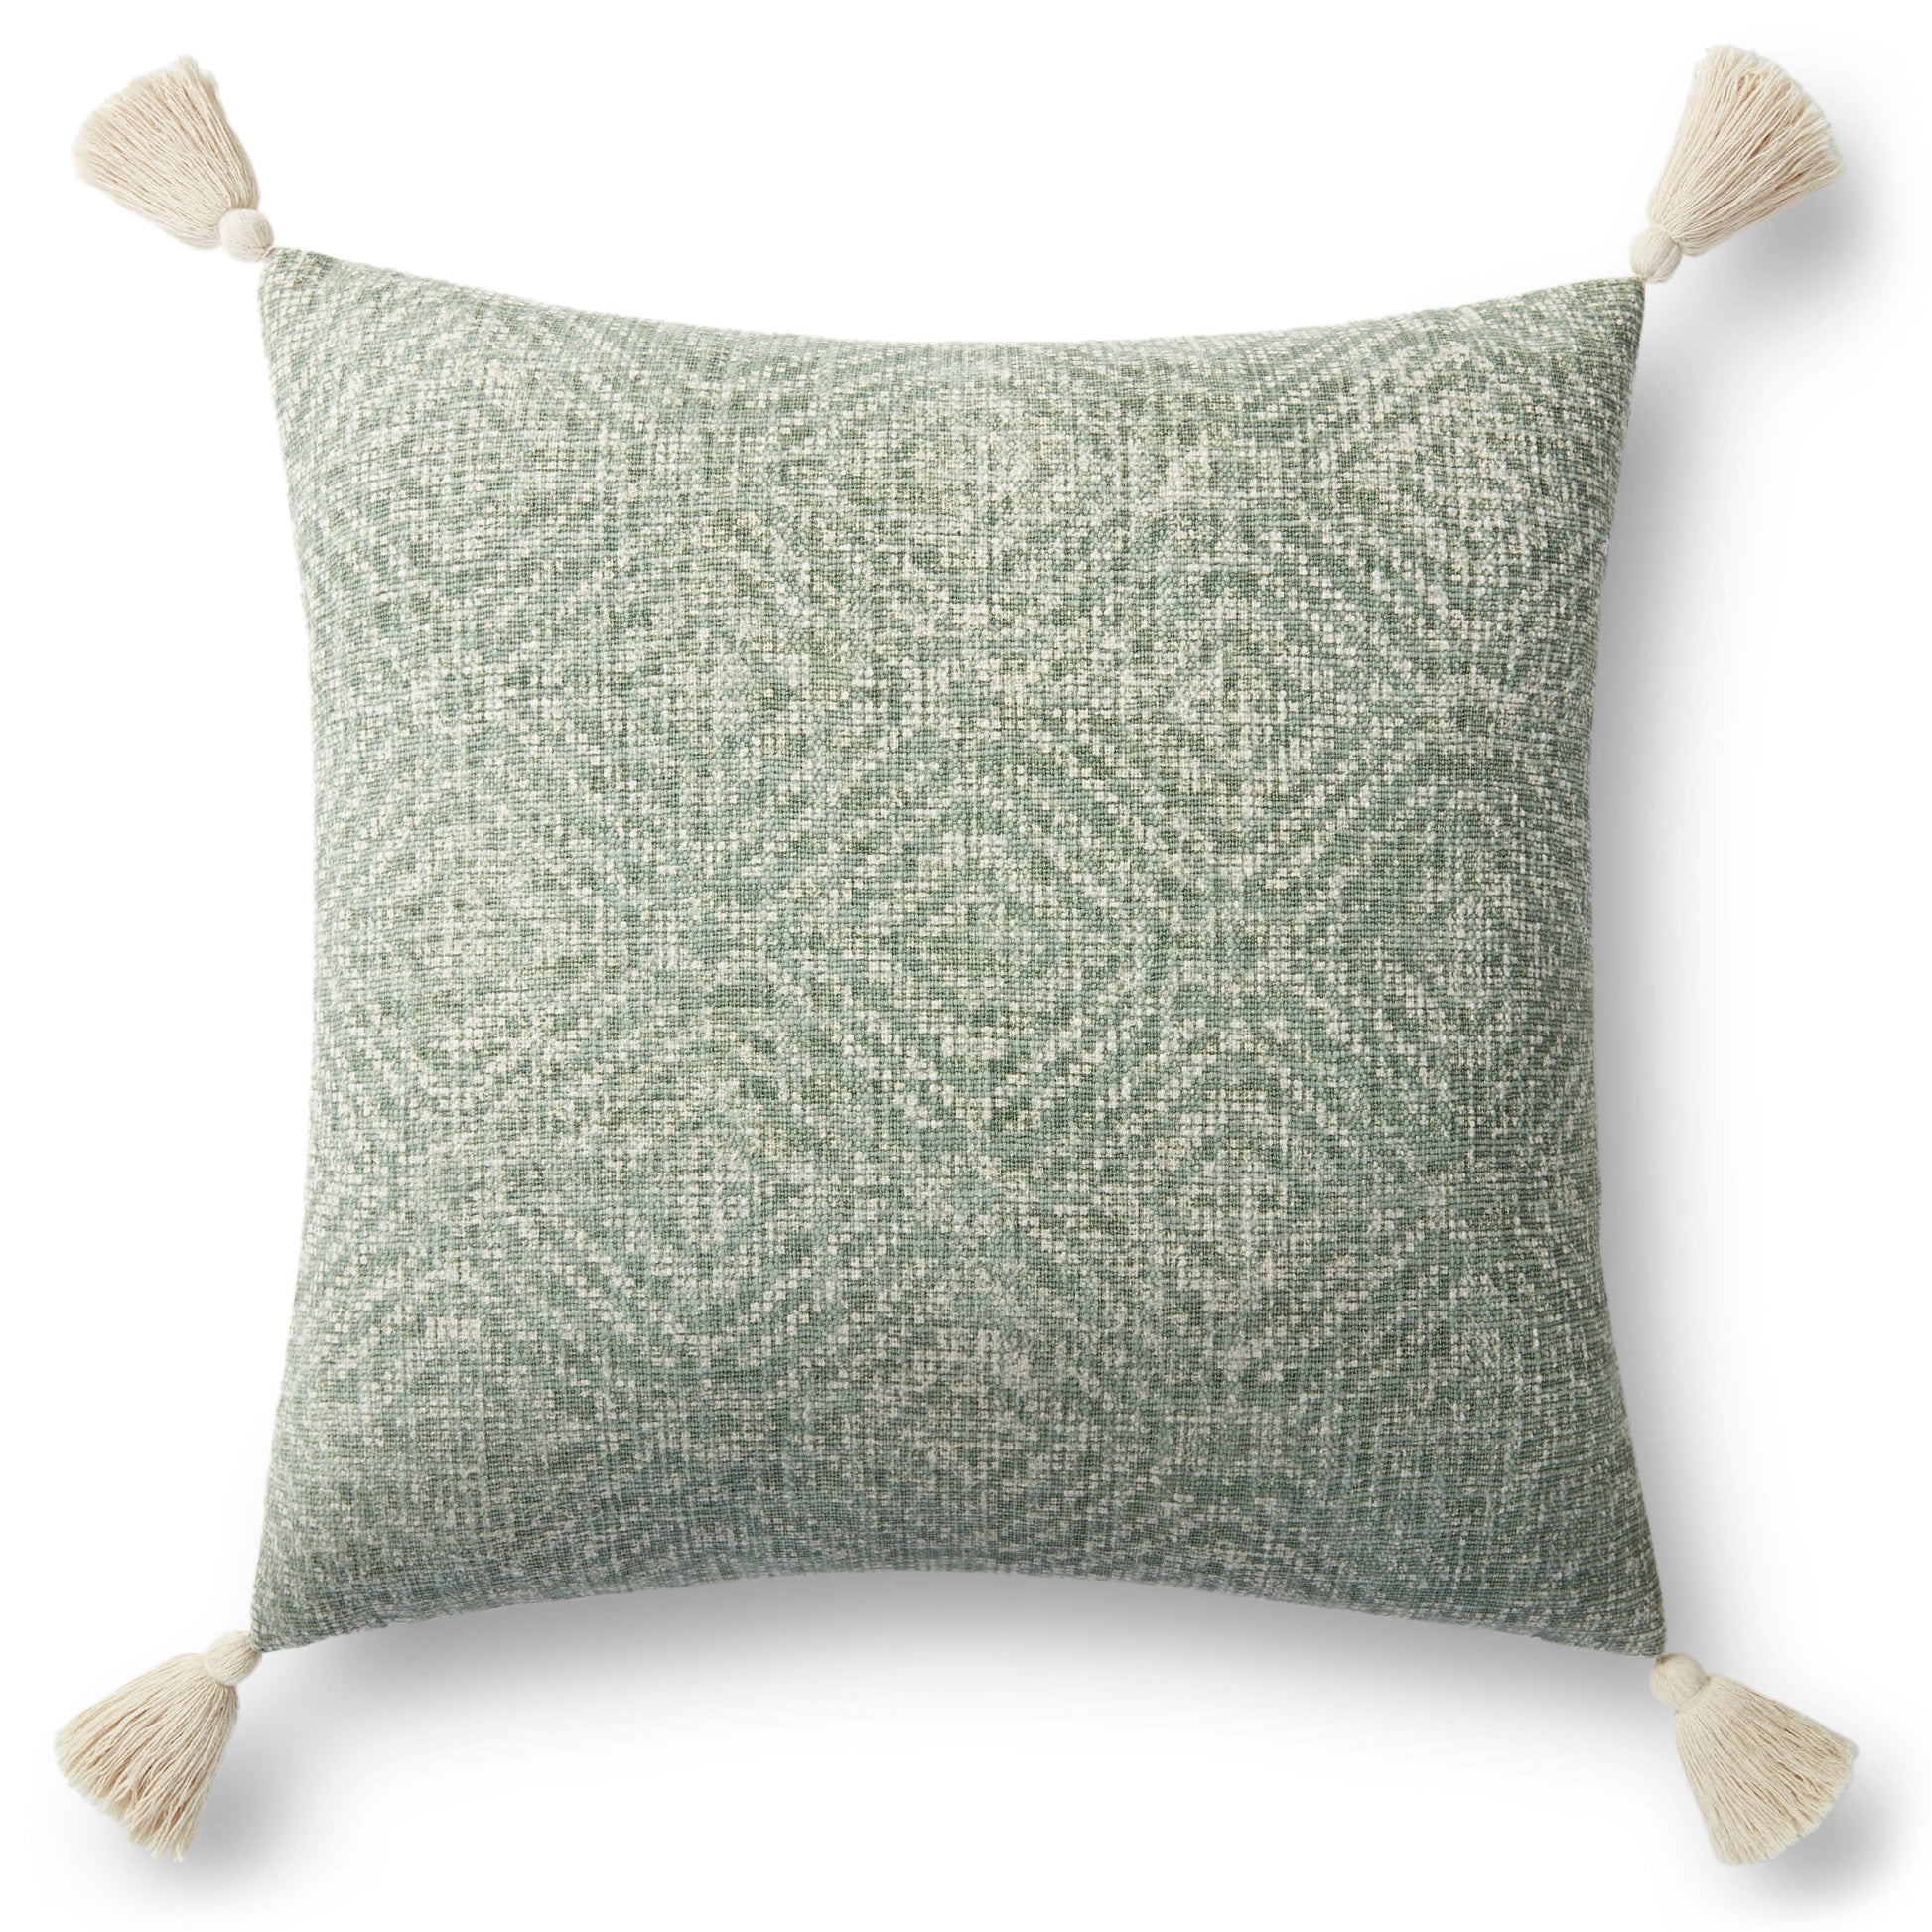 Photo of a pillow;  P0621 Green 13" x 21" Cover w/Poly Pillow